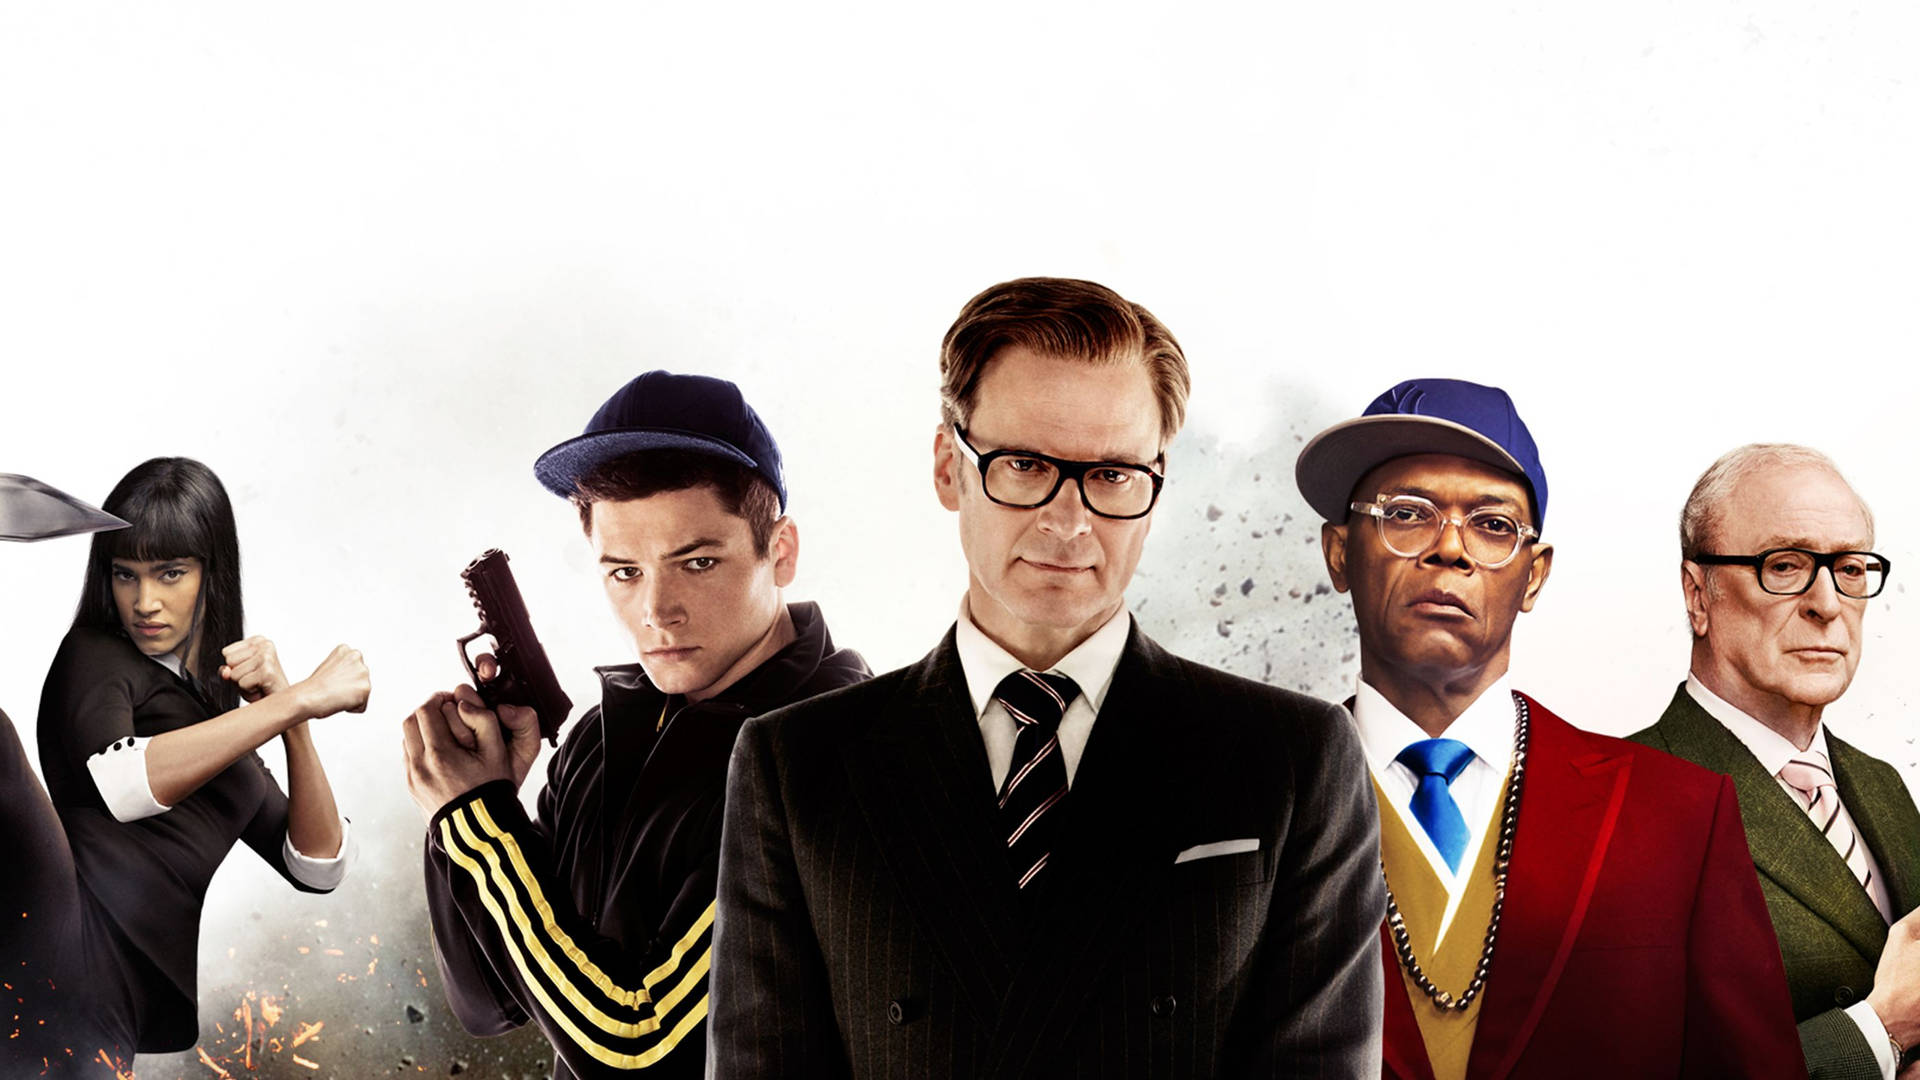 Kingsman The Secret Service Characters Movie Poster Pnufo91i0cy2aicy 